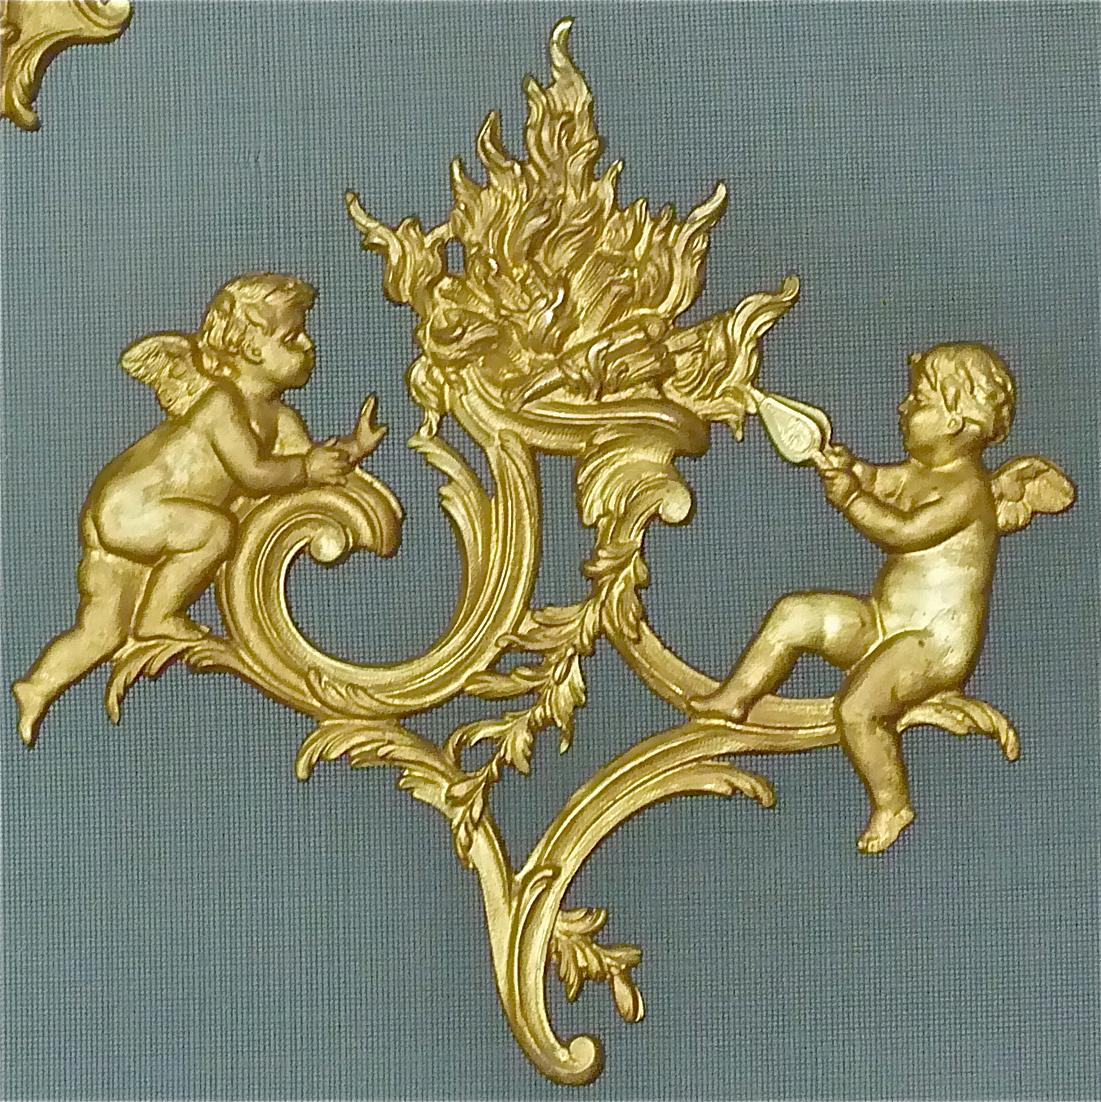 Antique French Gilt Bronze Fire Place Screen 19th Century Cherub Louis XV Style For Sale 1